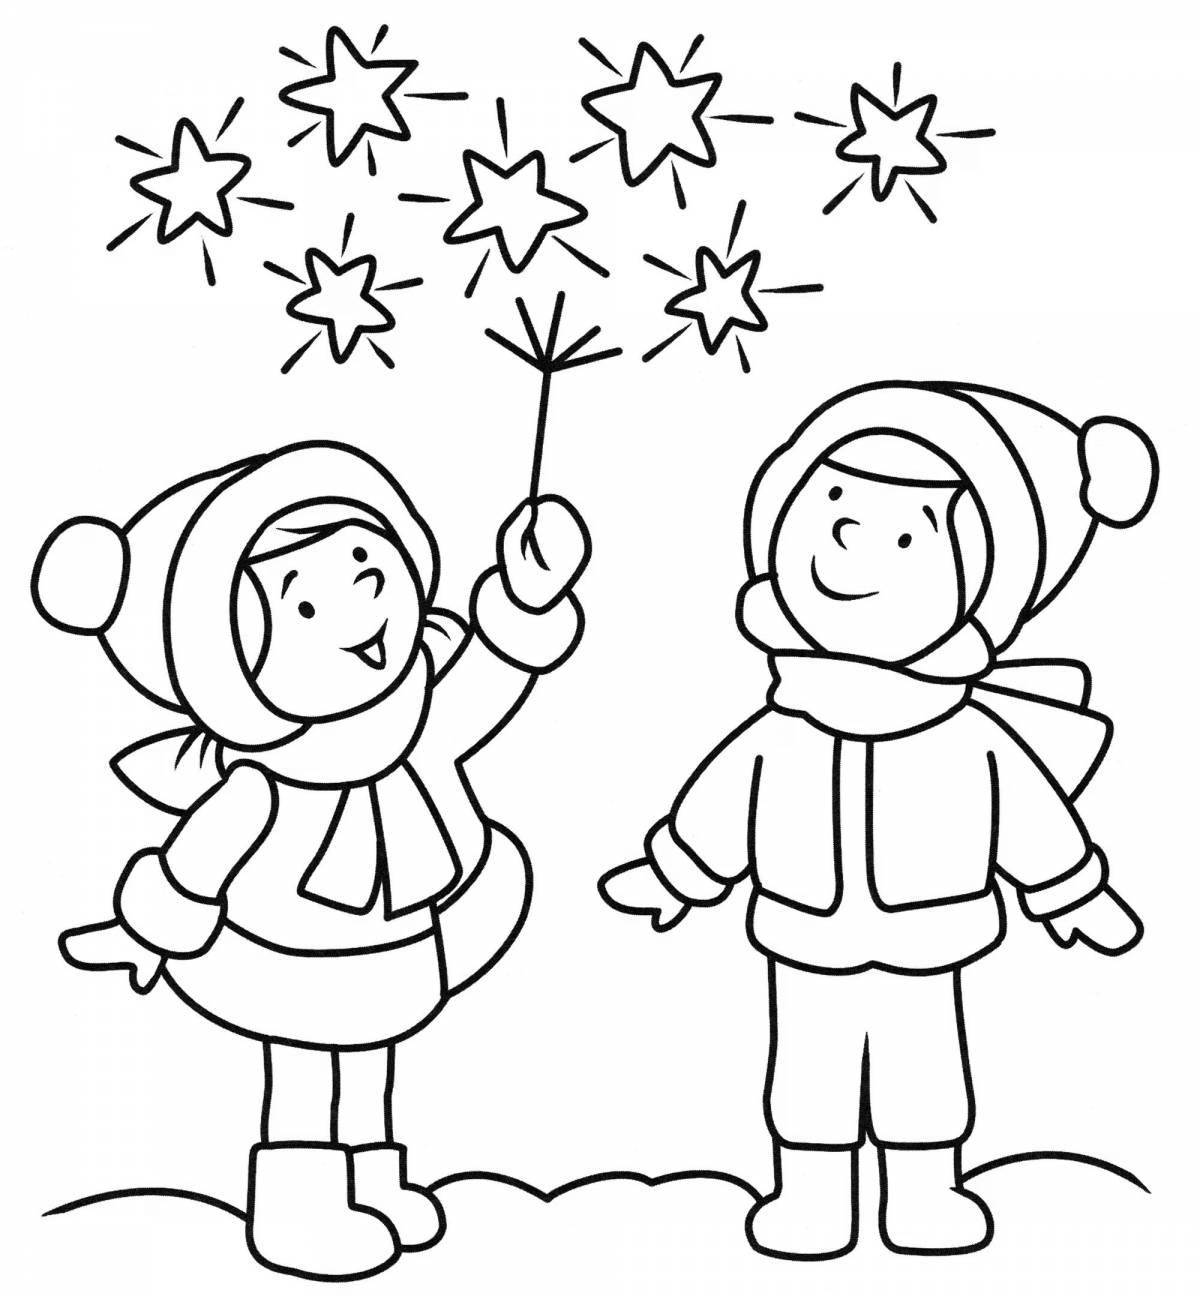 Color explosion-proof Christmas coloring book